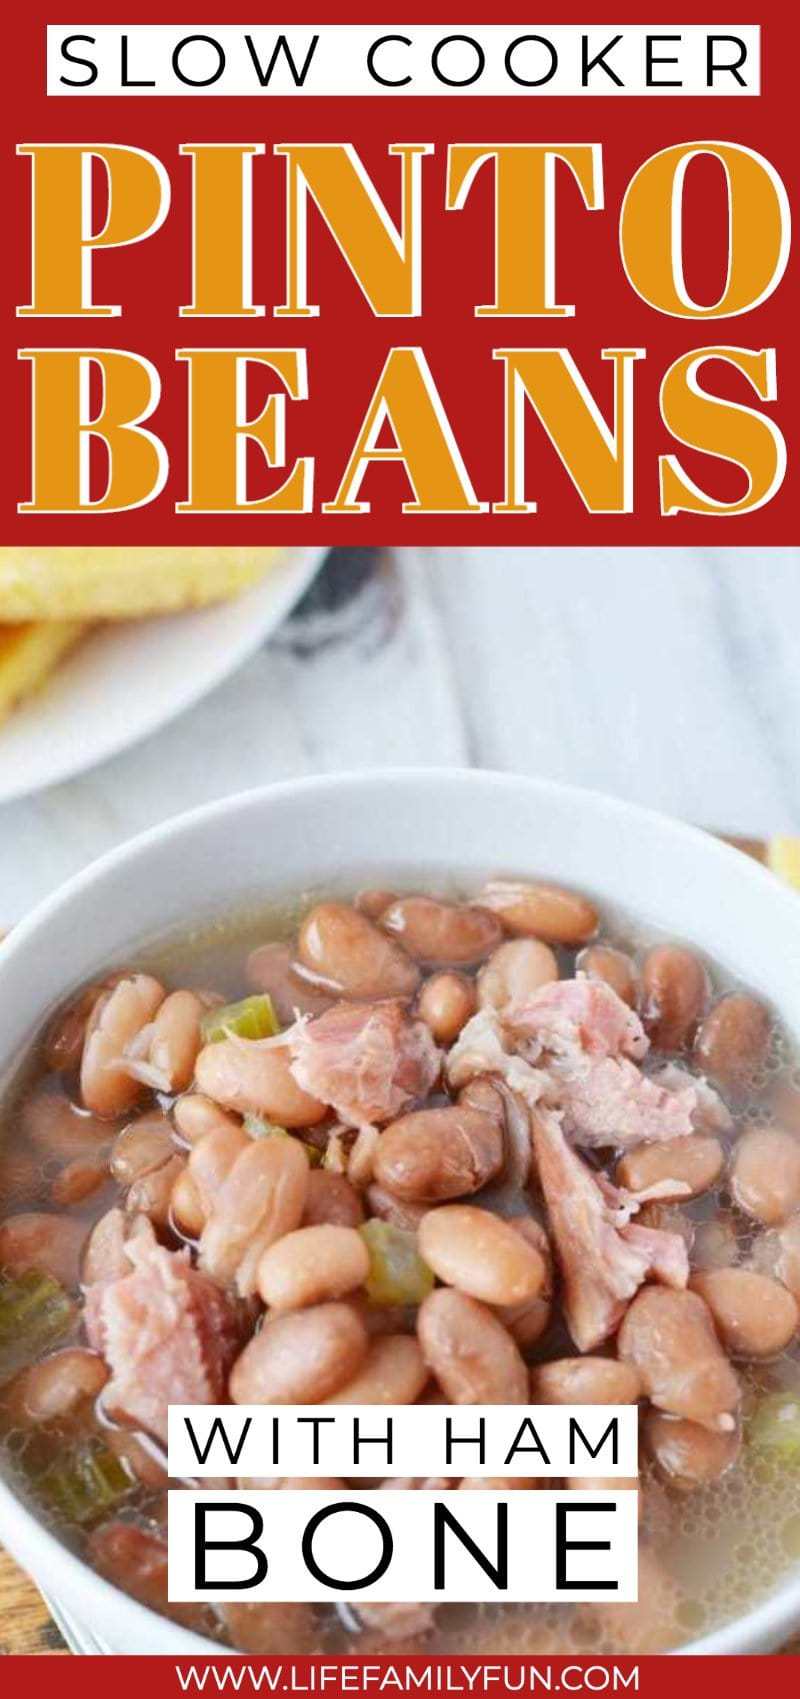 Slow Cooker Pinto Beans With Ham Bone - A Southern Favorite Recipe